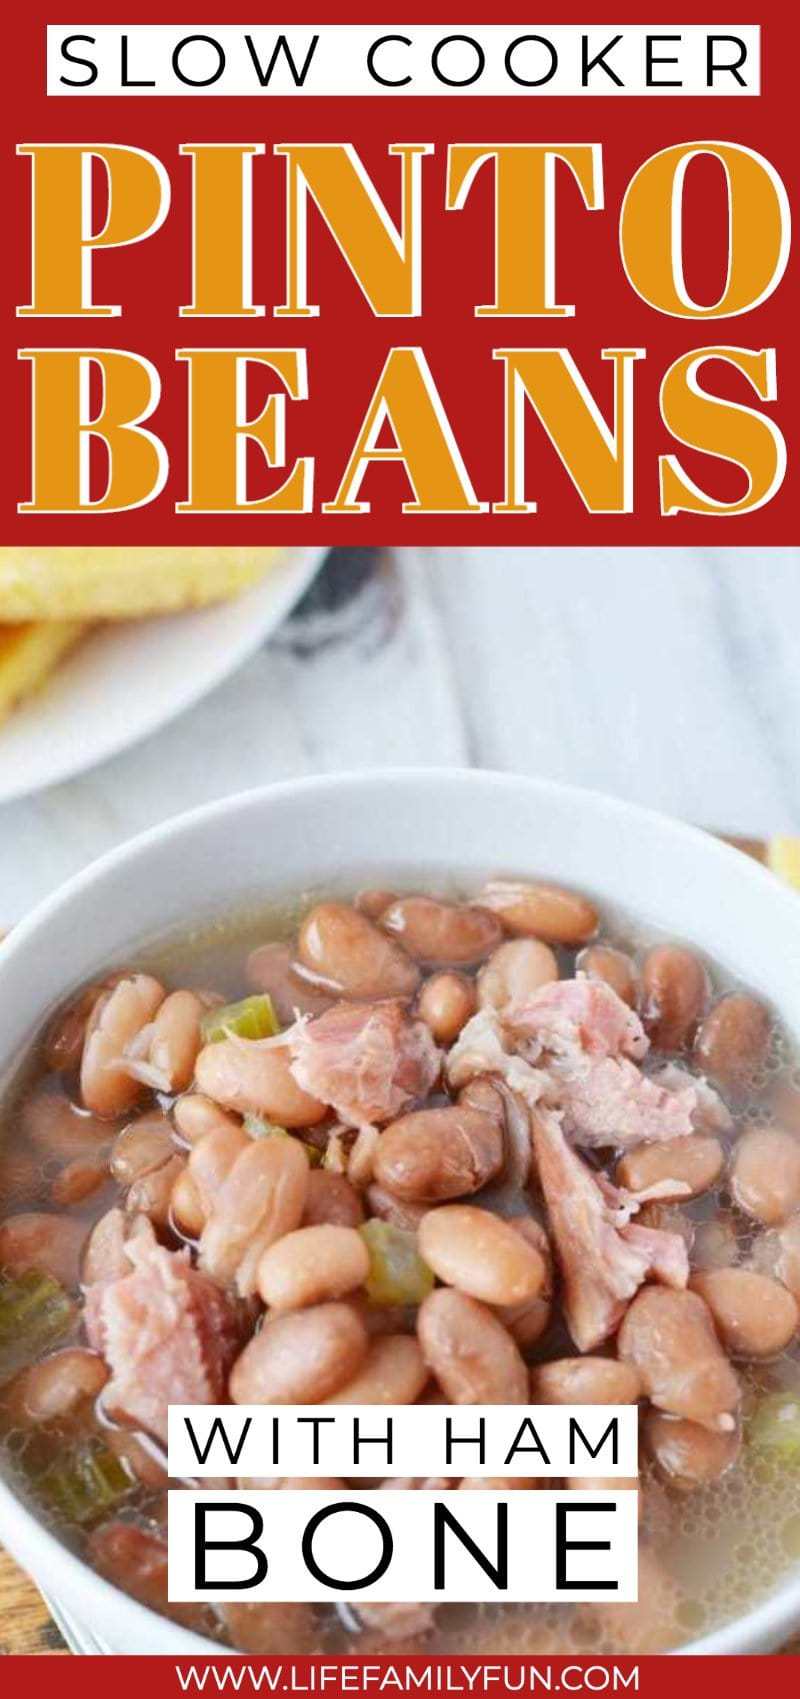 Slow Cooker Pinto Beans With Ham Bone - A Southern Favorite Recipe